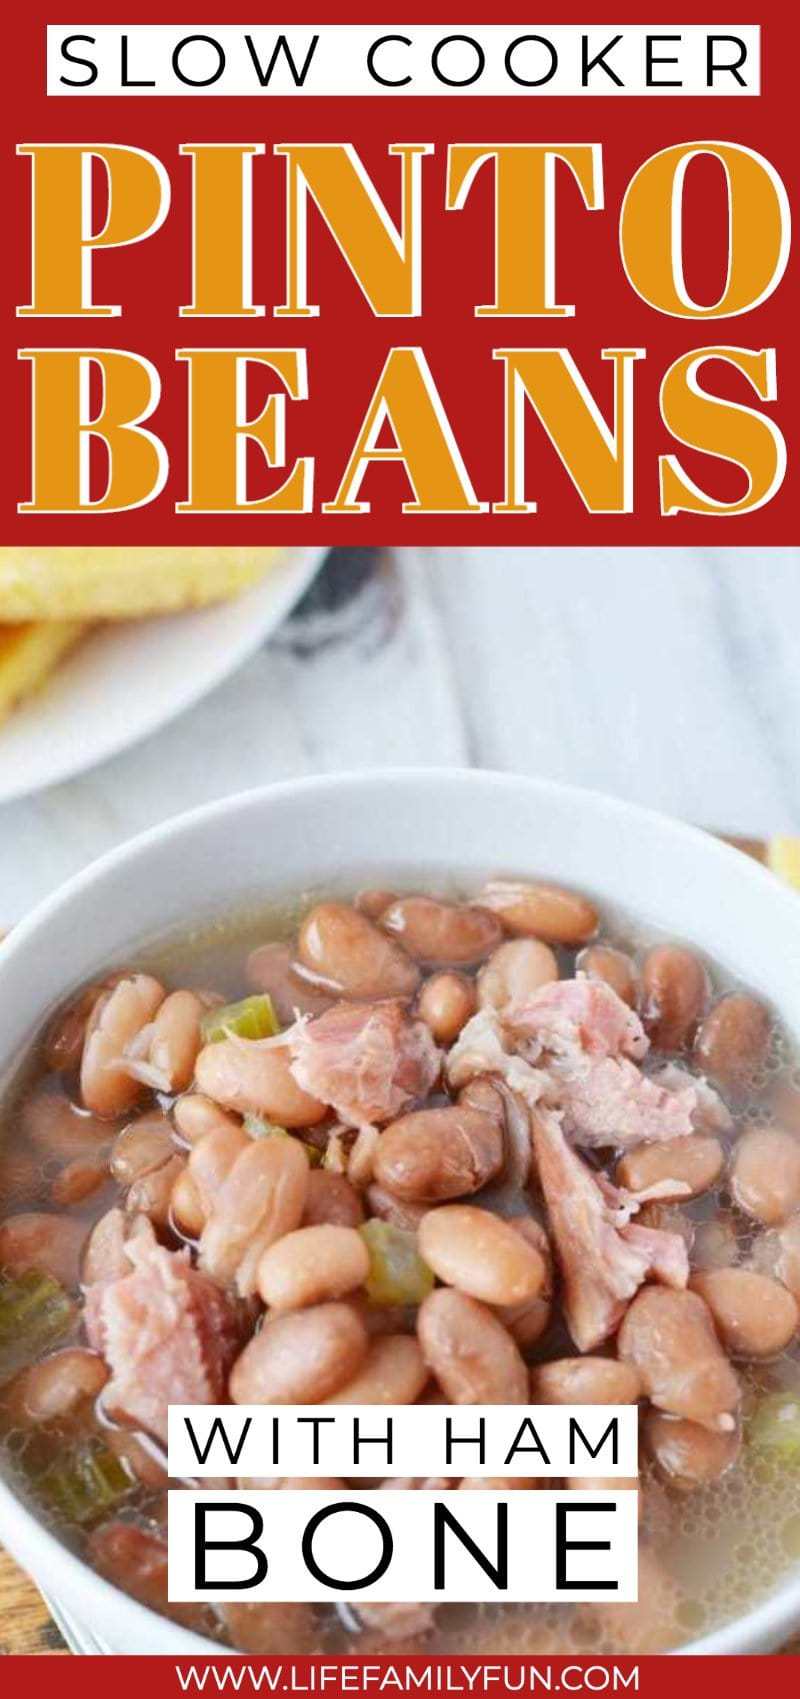 Slow Cooker Pinto Beans With Ham Bone - A Southern Favorite Recipe